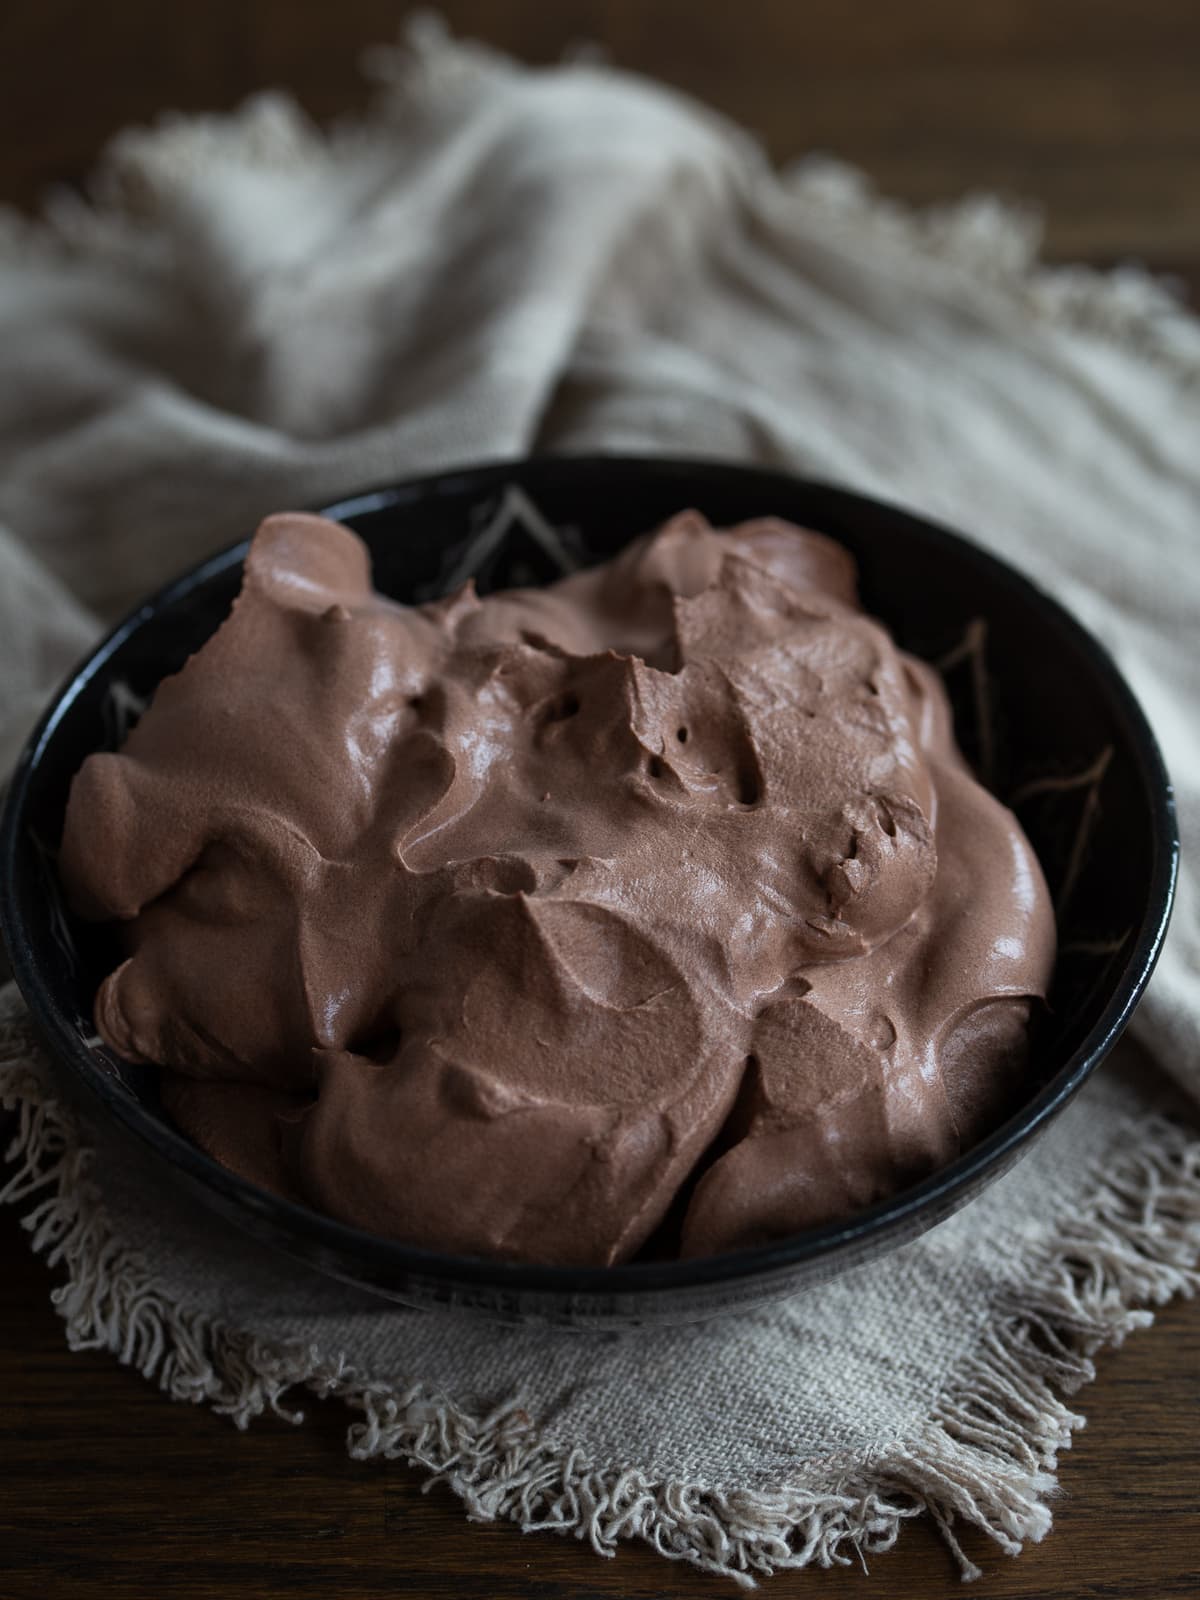 A batch of cocoa whipped cream in a black bowl.